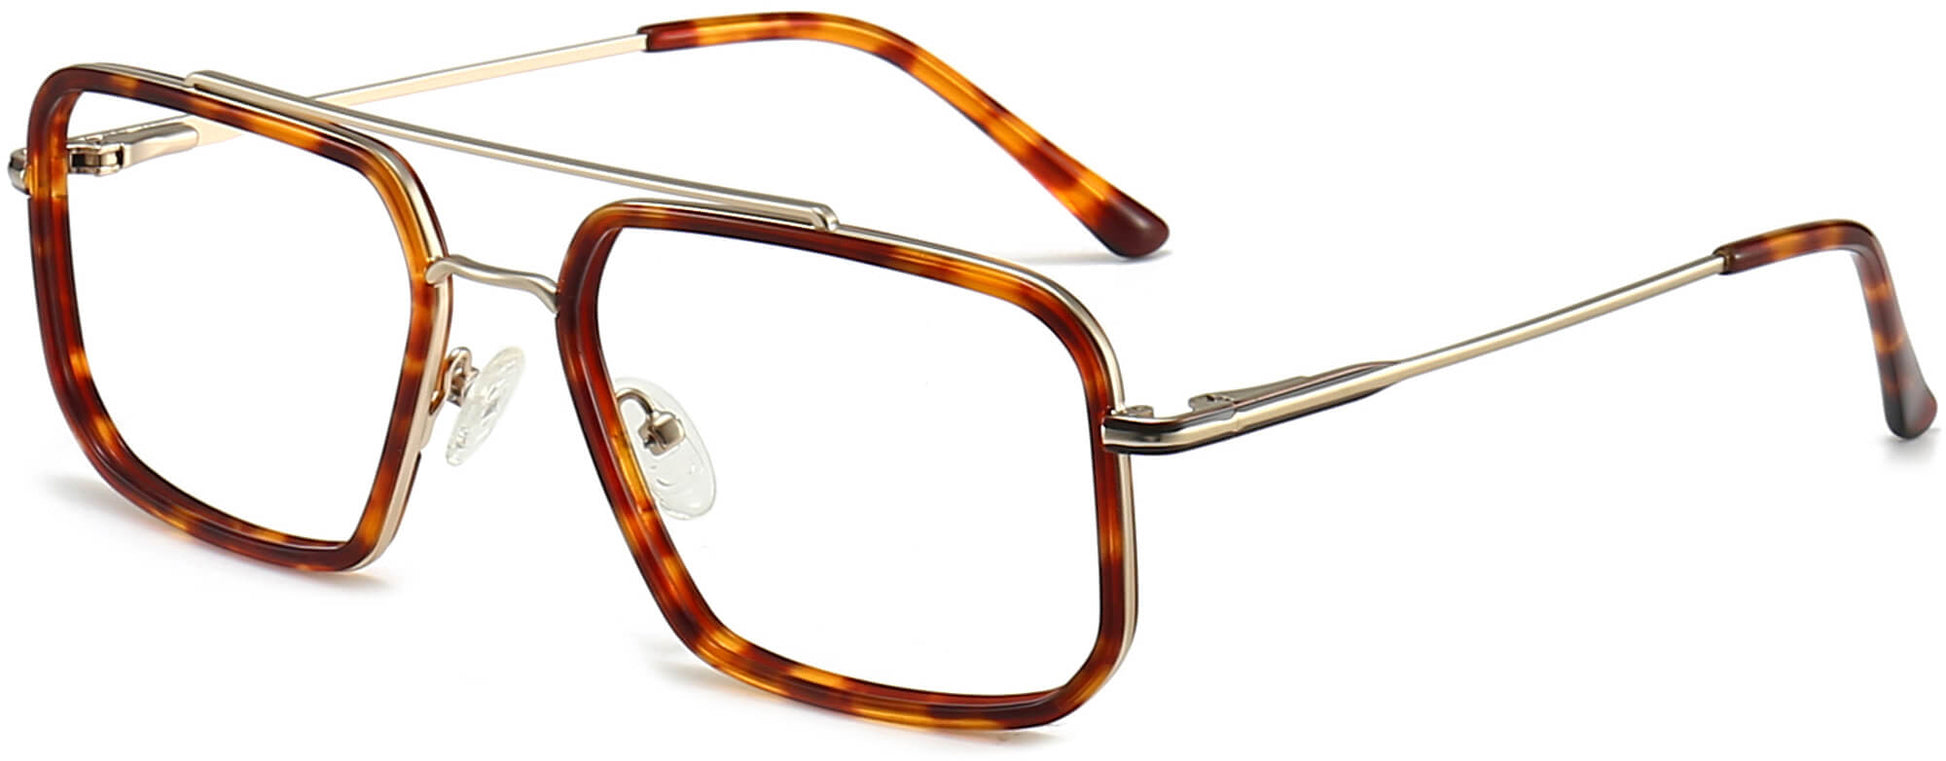 Saul Square Tortoise Eyeglasses from ANRRI, angle view